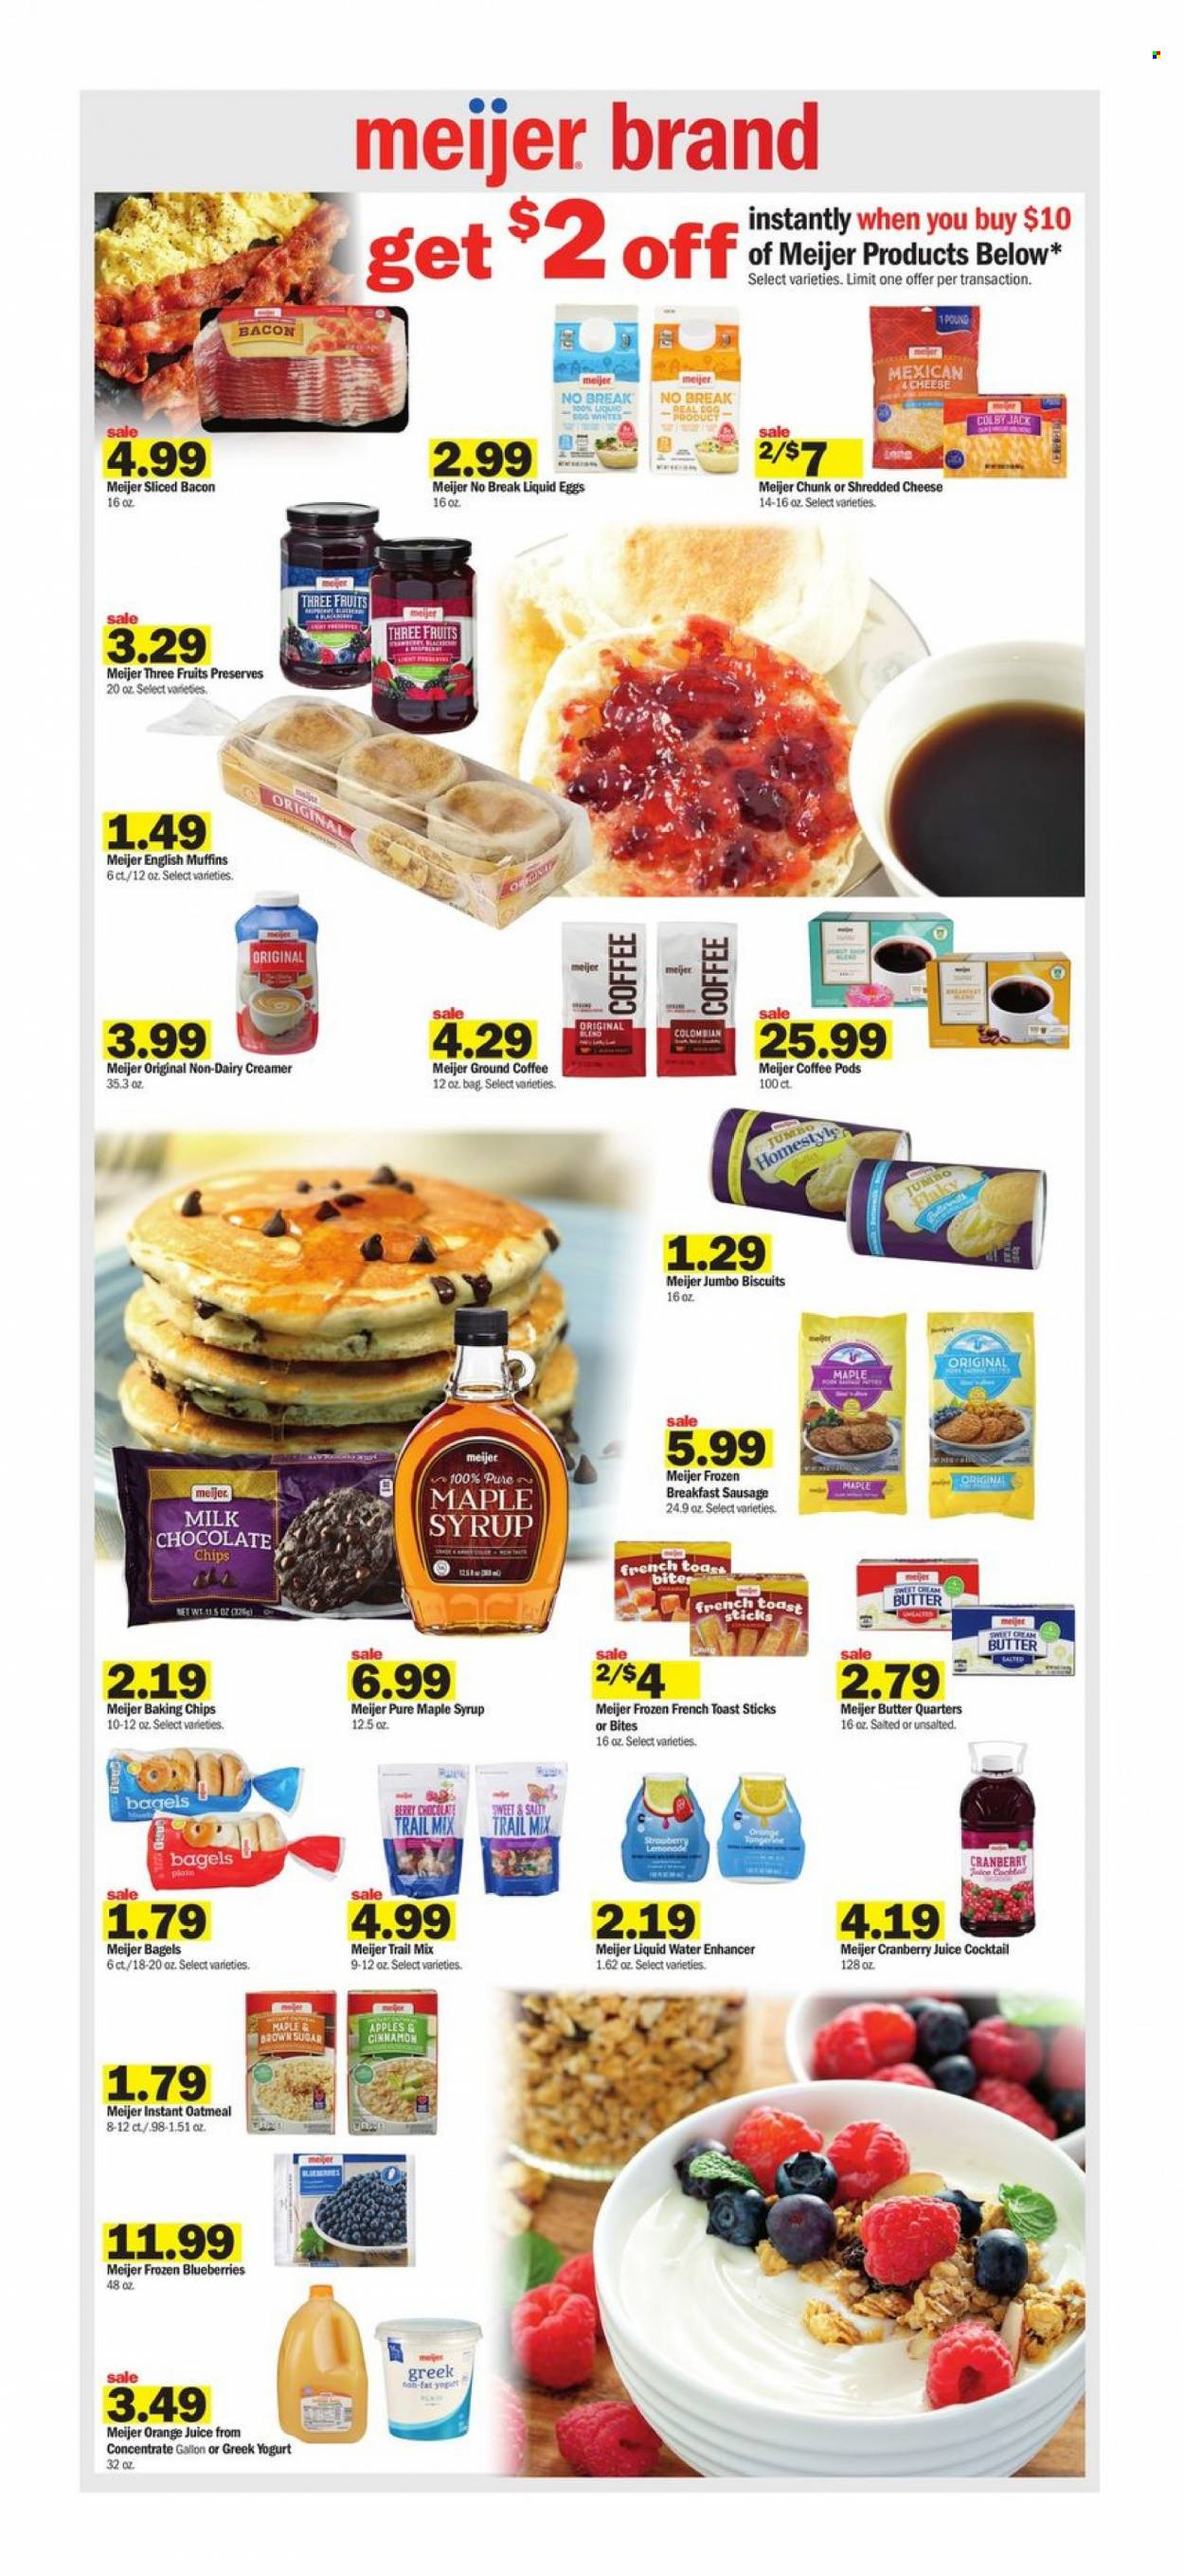 thumbnail - Meijer Flyer - 01/16/2022 - 01/22/2022 - Sales products - bagels, english muffins, apples, blueberries, clams, bacon, sausage, Colby cheese, shredded cheese, greek yoghurt, yoghurt, milk, eggs, butter, non dairy creamer, creamer, chocolate, biscuit, Ego, oatmeal, baking chips, cinnamon, maple syrup, syrup, trail mix, cranberry juice, lemonade, orange juice, juice, coffee pods, ground coffee. Page 11.